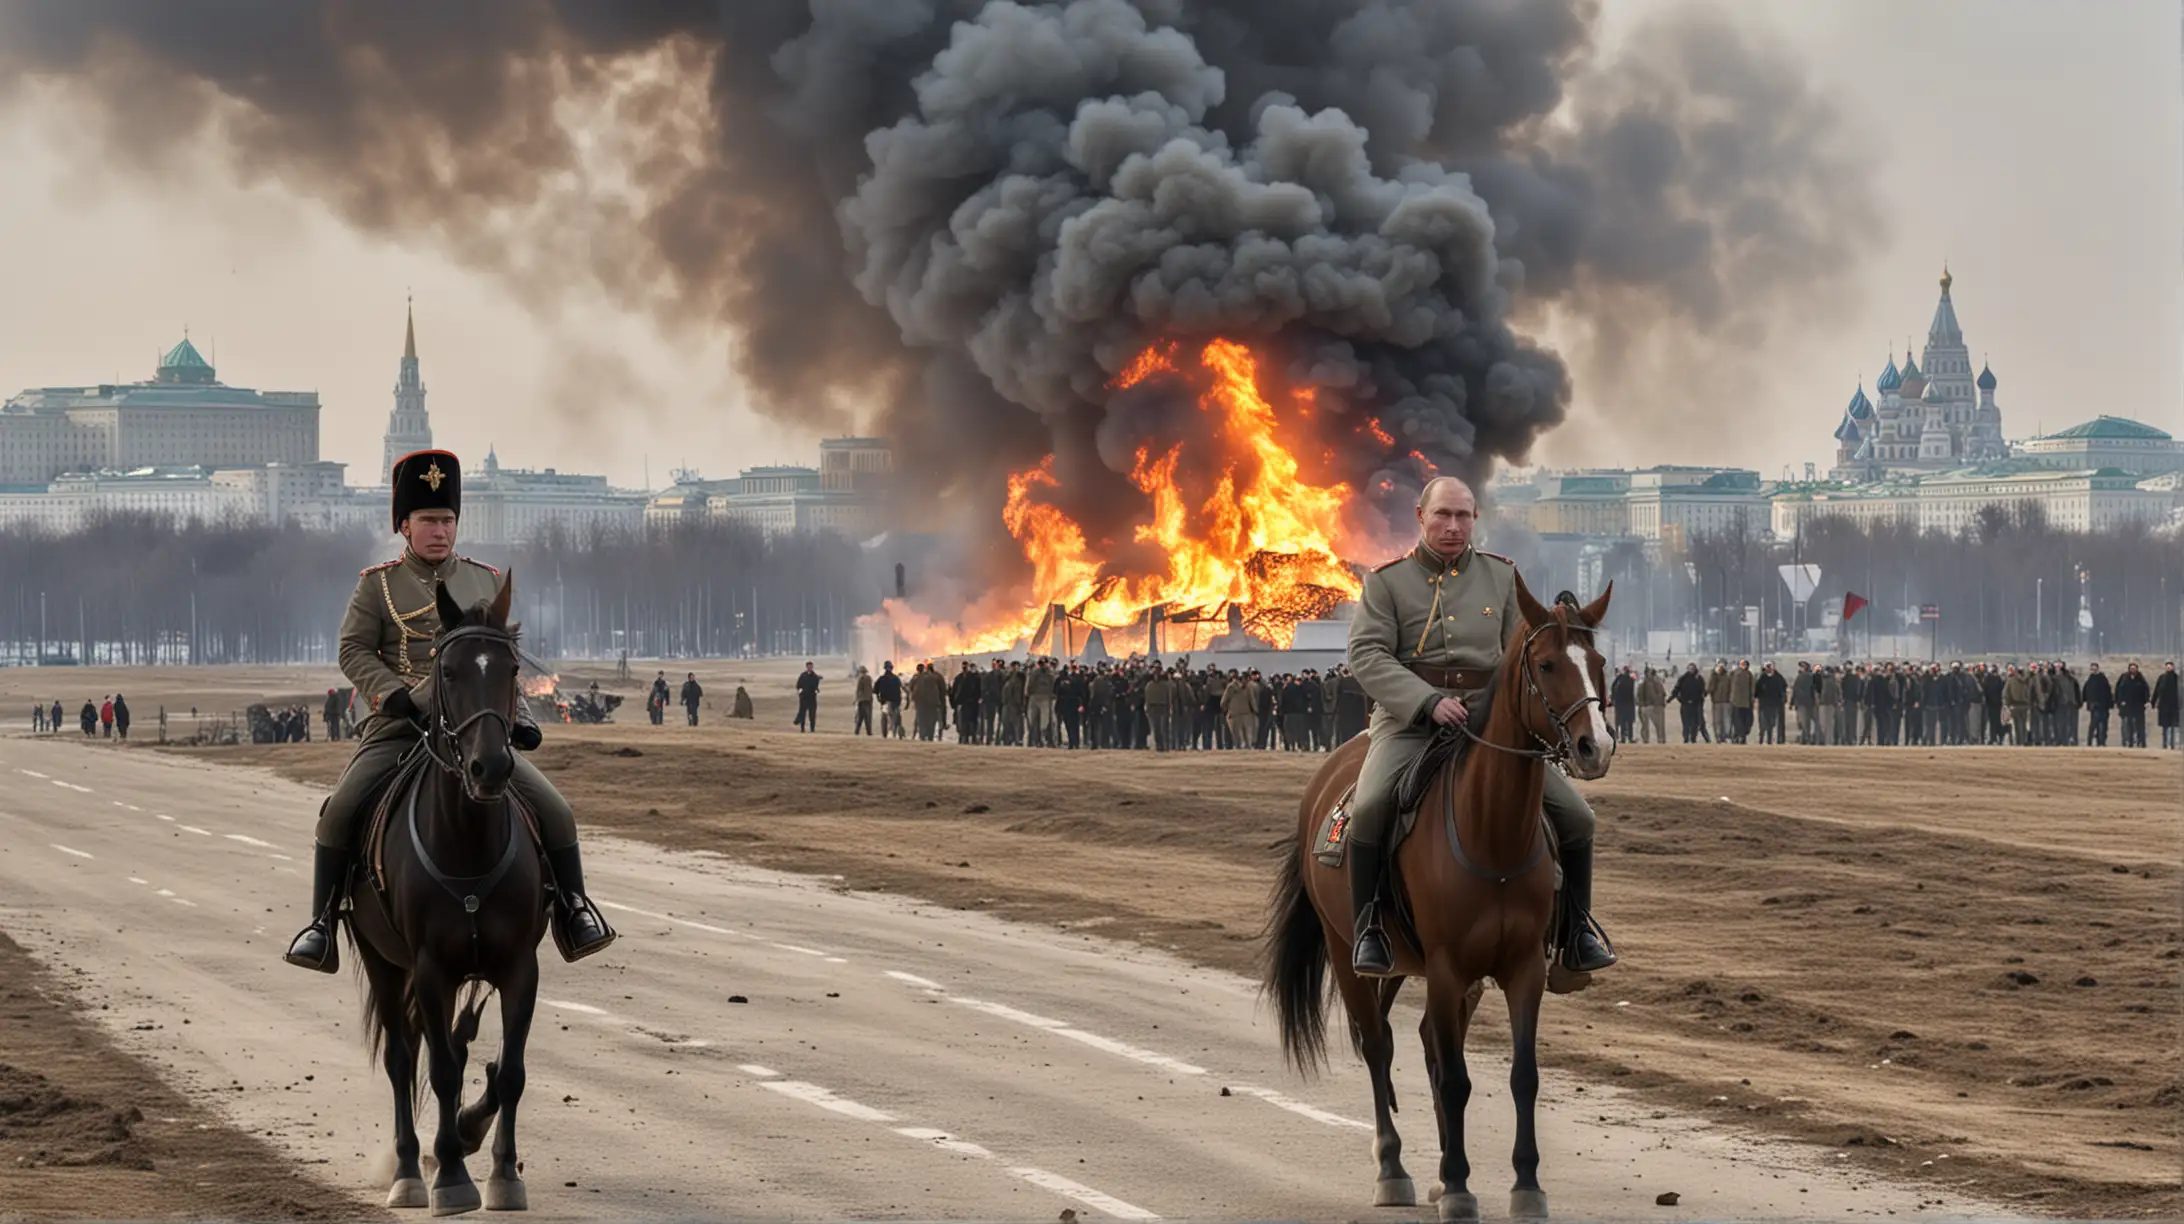 Vladimir Putin with napoleon's hat on a horse Retreating From Moscow with the Kremlin burning far in the background along the road are multiple injured soldiers 